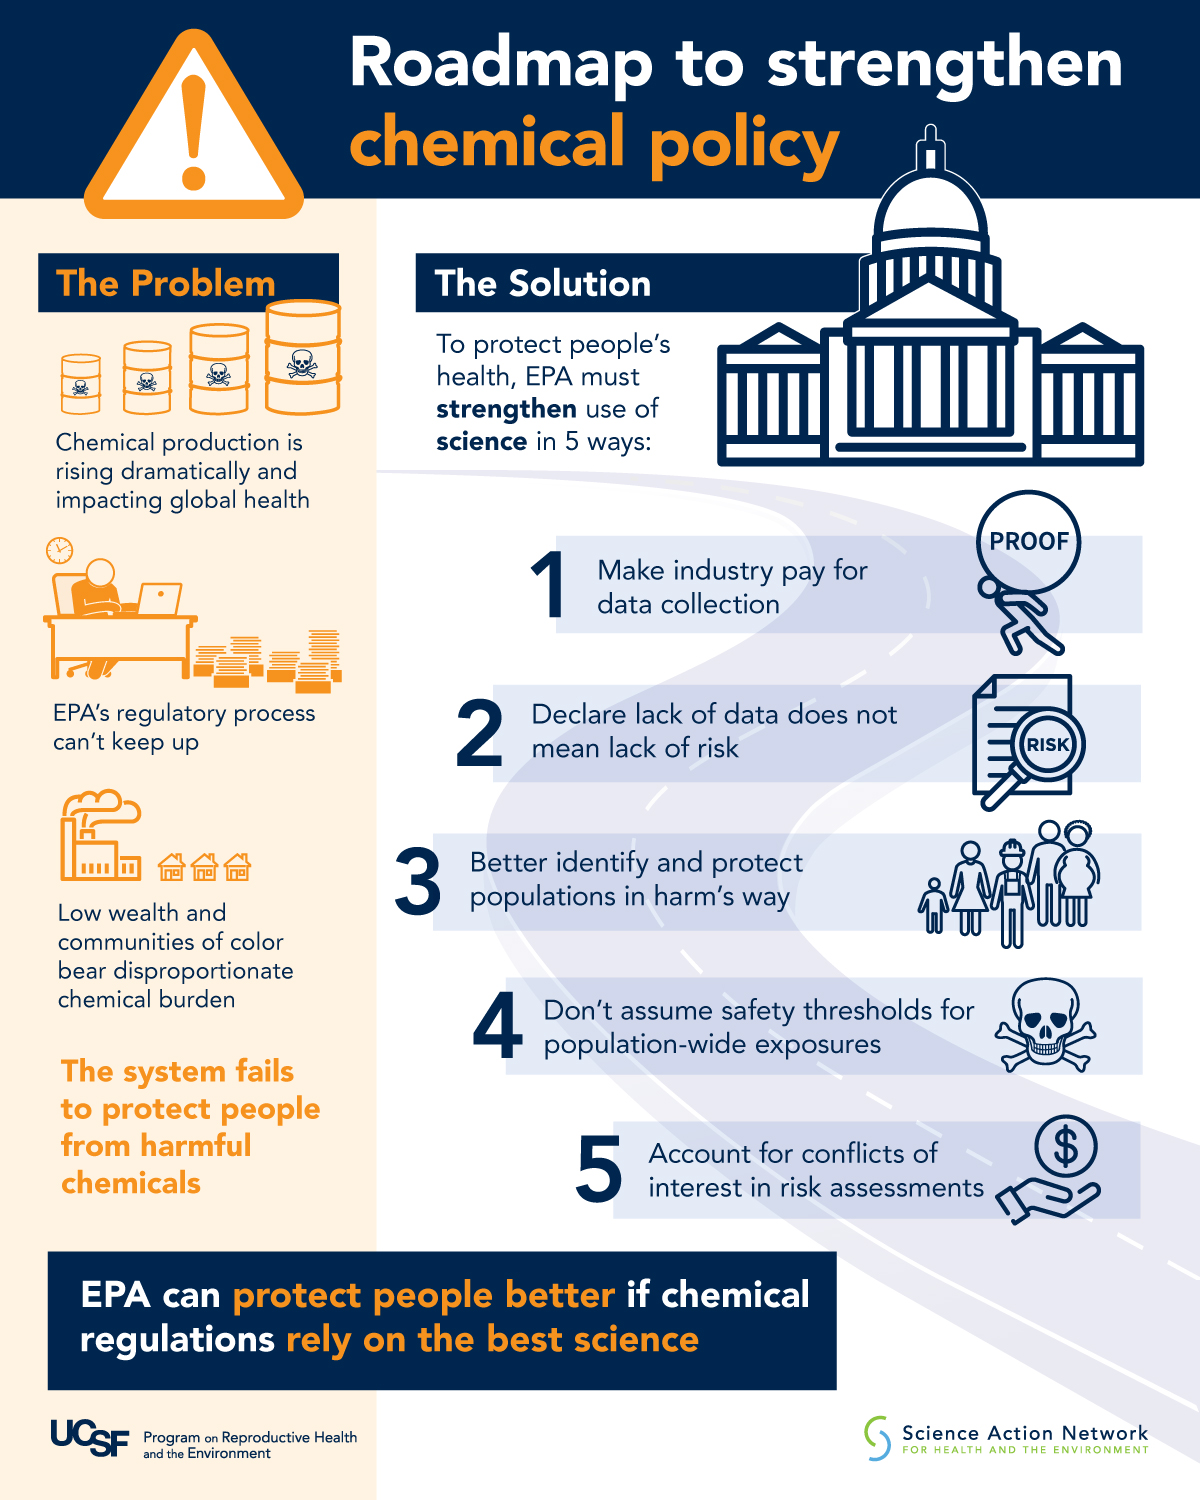 Roadmap to strengthen chemical policy infographic